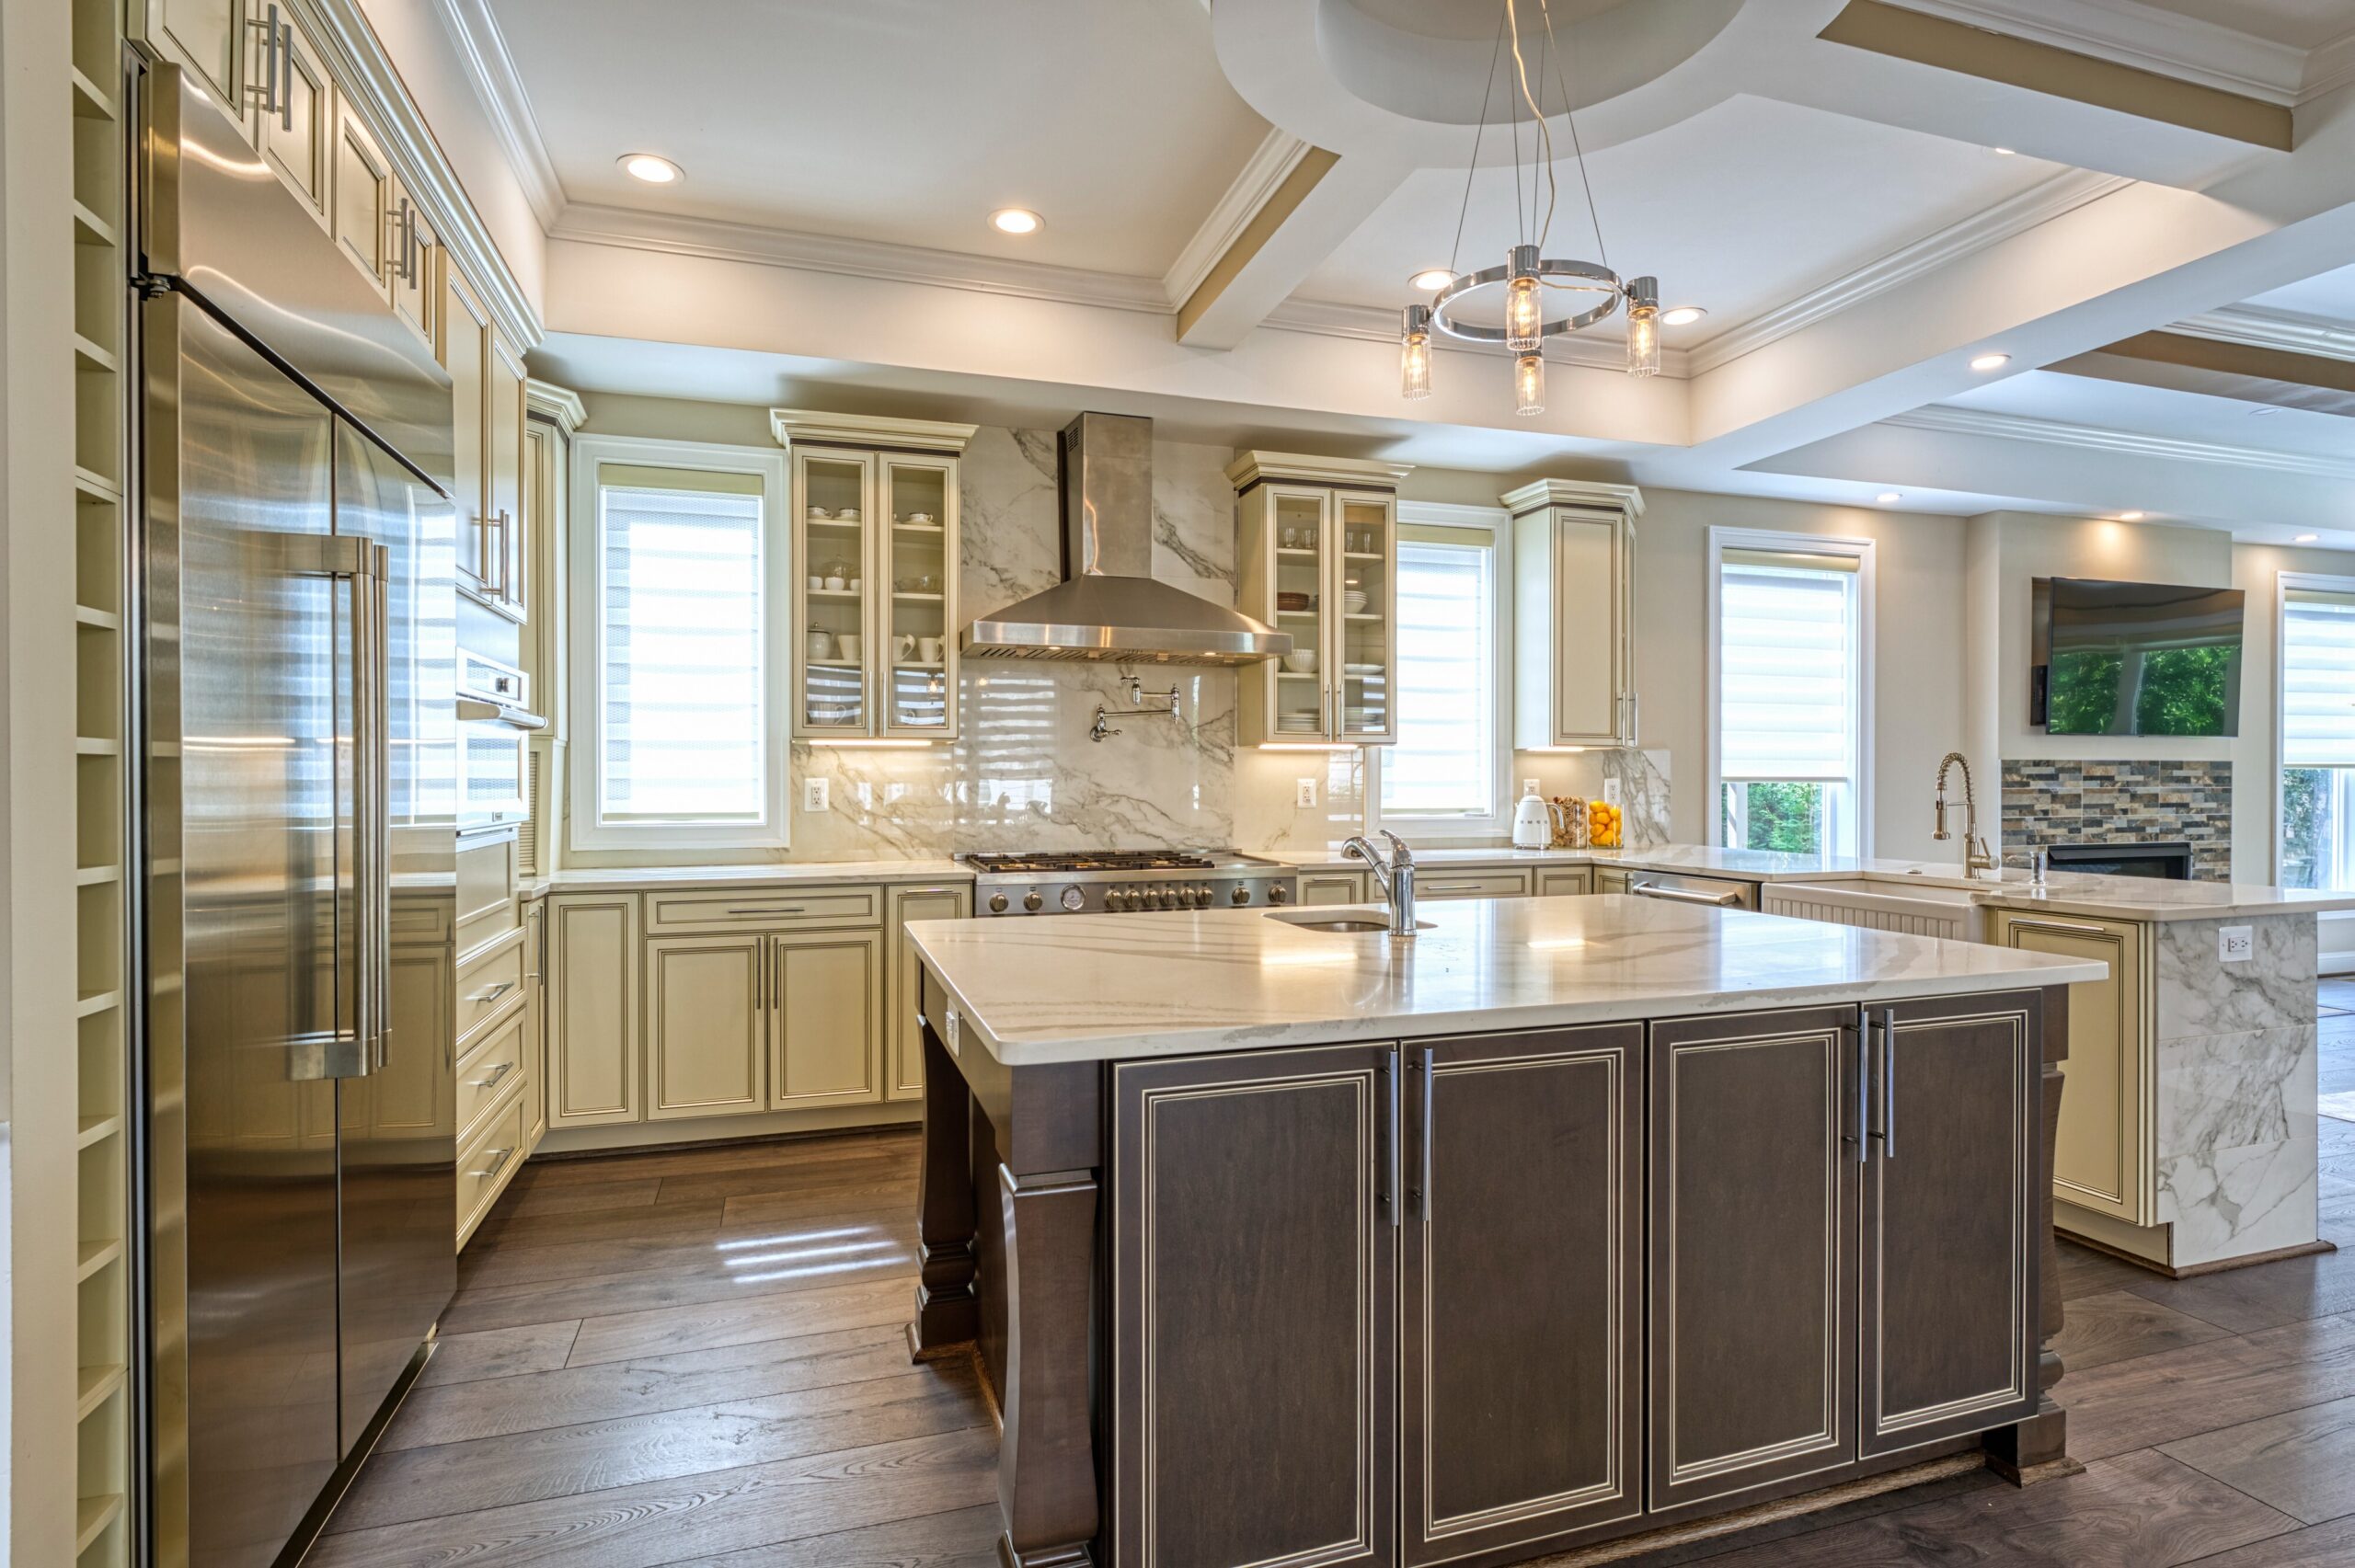 professional Fusion photo of the interior of a home in McLean, VA - showing gourmet kitchen with intricate coffered ceiling, huge counter, stainless fridge and hood/range and large kitchen island